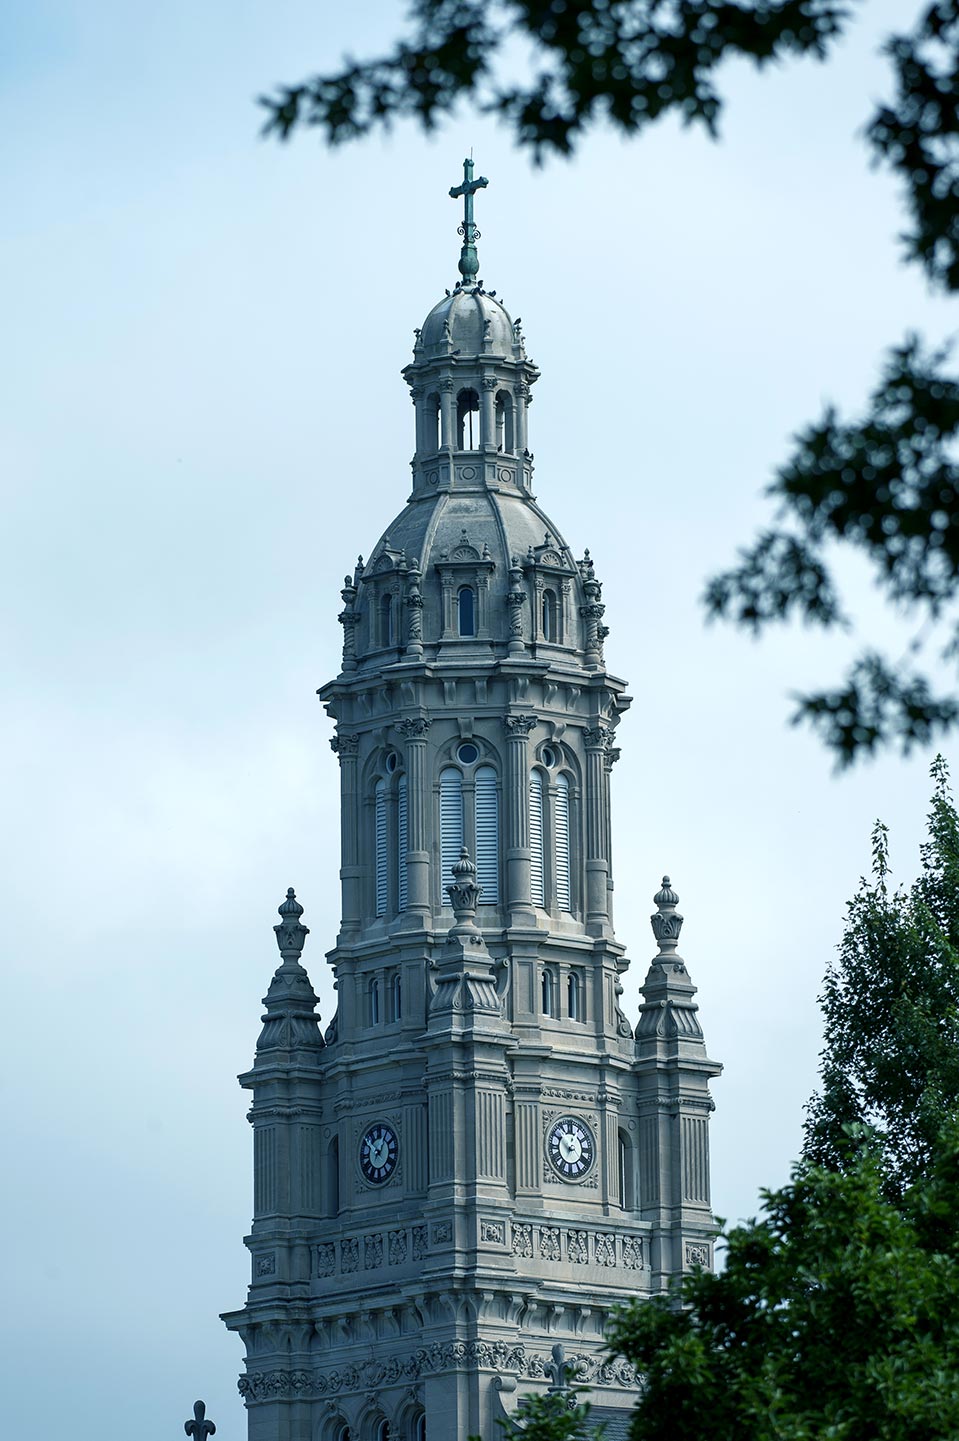 The bell tower of the Church of the Immaculate Conception